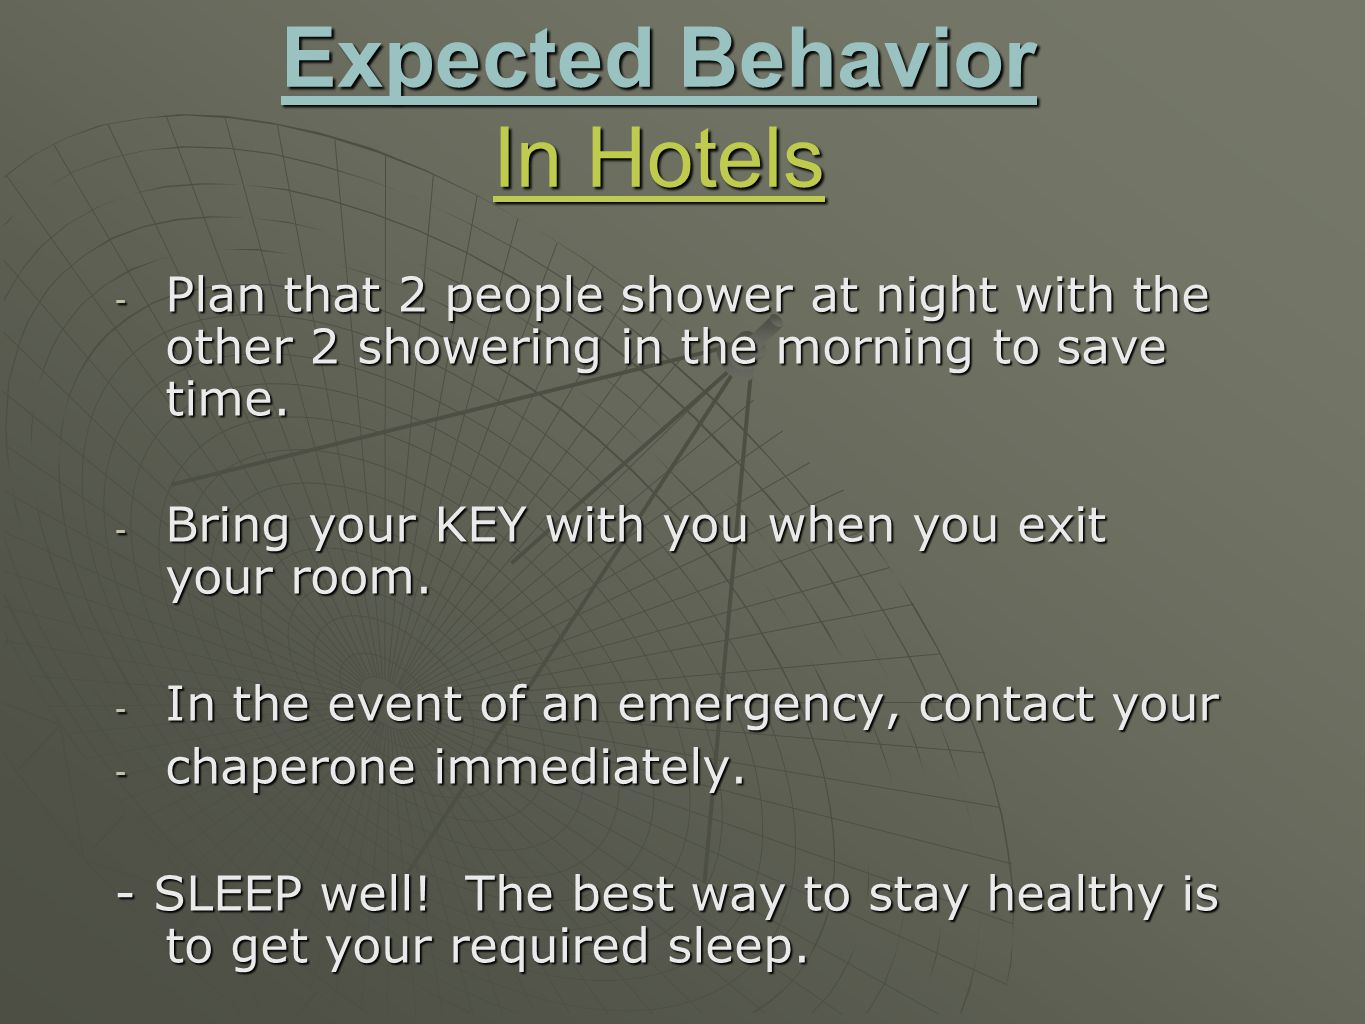 Expected Behavior In Hotels - Plan that 2 people shower at night with the other 2 showering in the morning to save time.